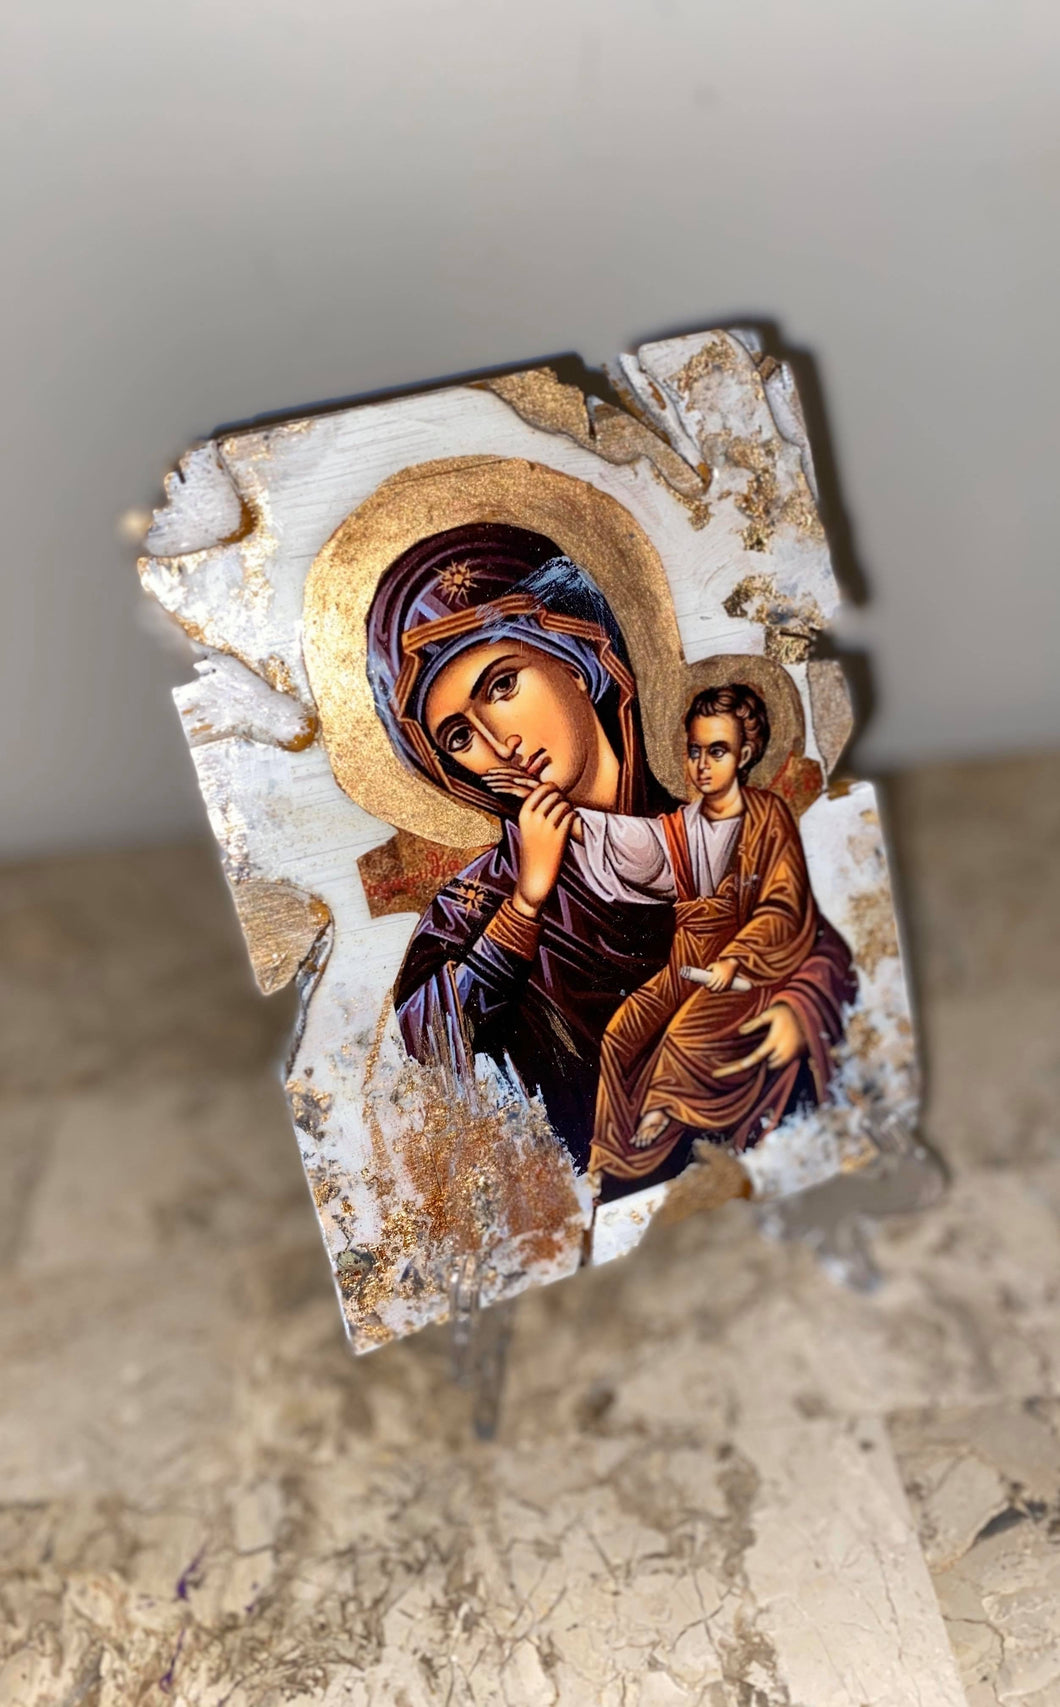 Mary with baby Jesus - Panagia- religious wood epoxy resin handmade icon art - Only 1 off - Original xsmall size